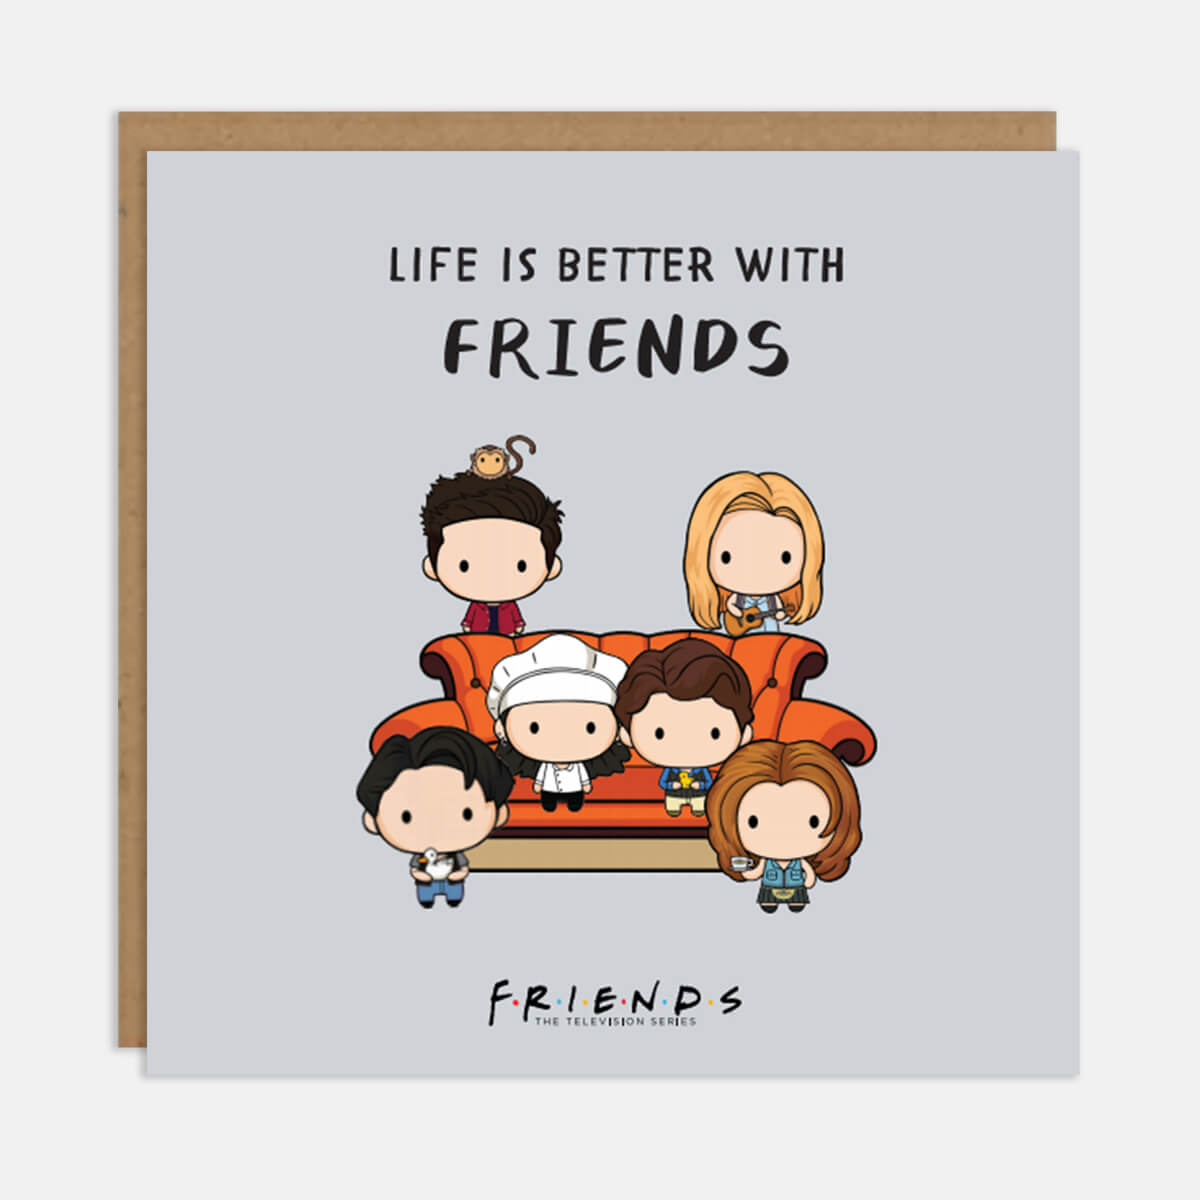 Friends Tv Show Greetings Card - Grey Card With Illustration of all Friends characters sitting on an orange card. Card reads 'Life Is Better With Friends'